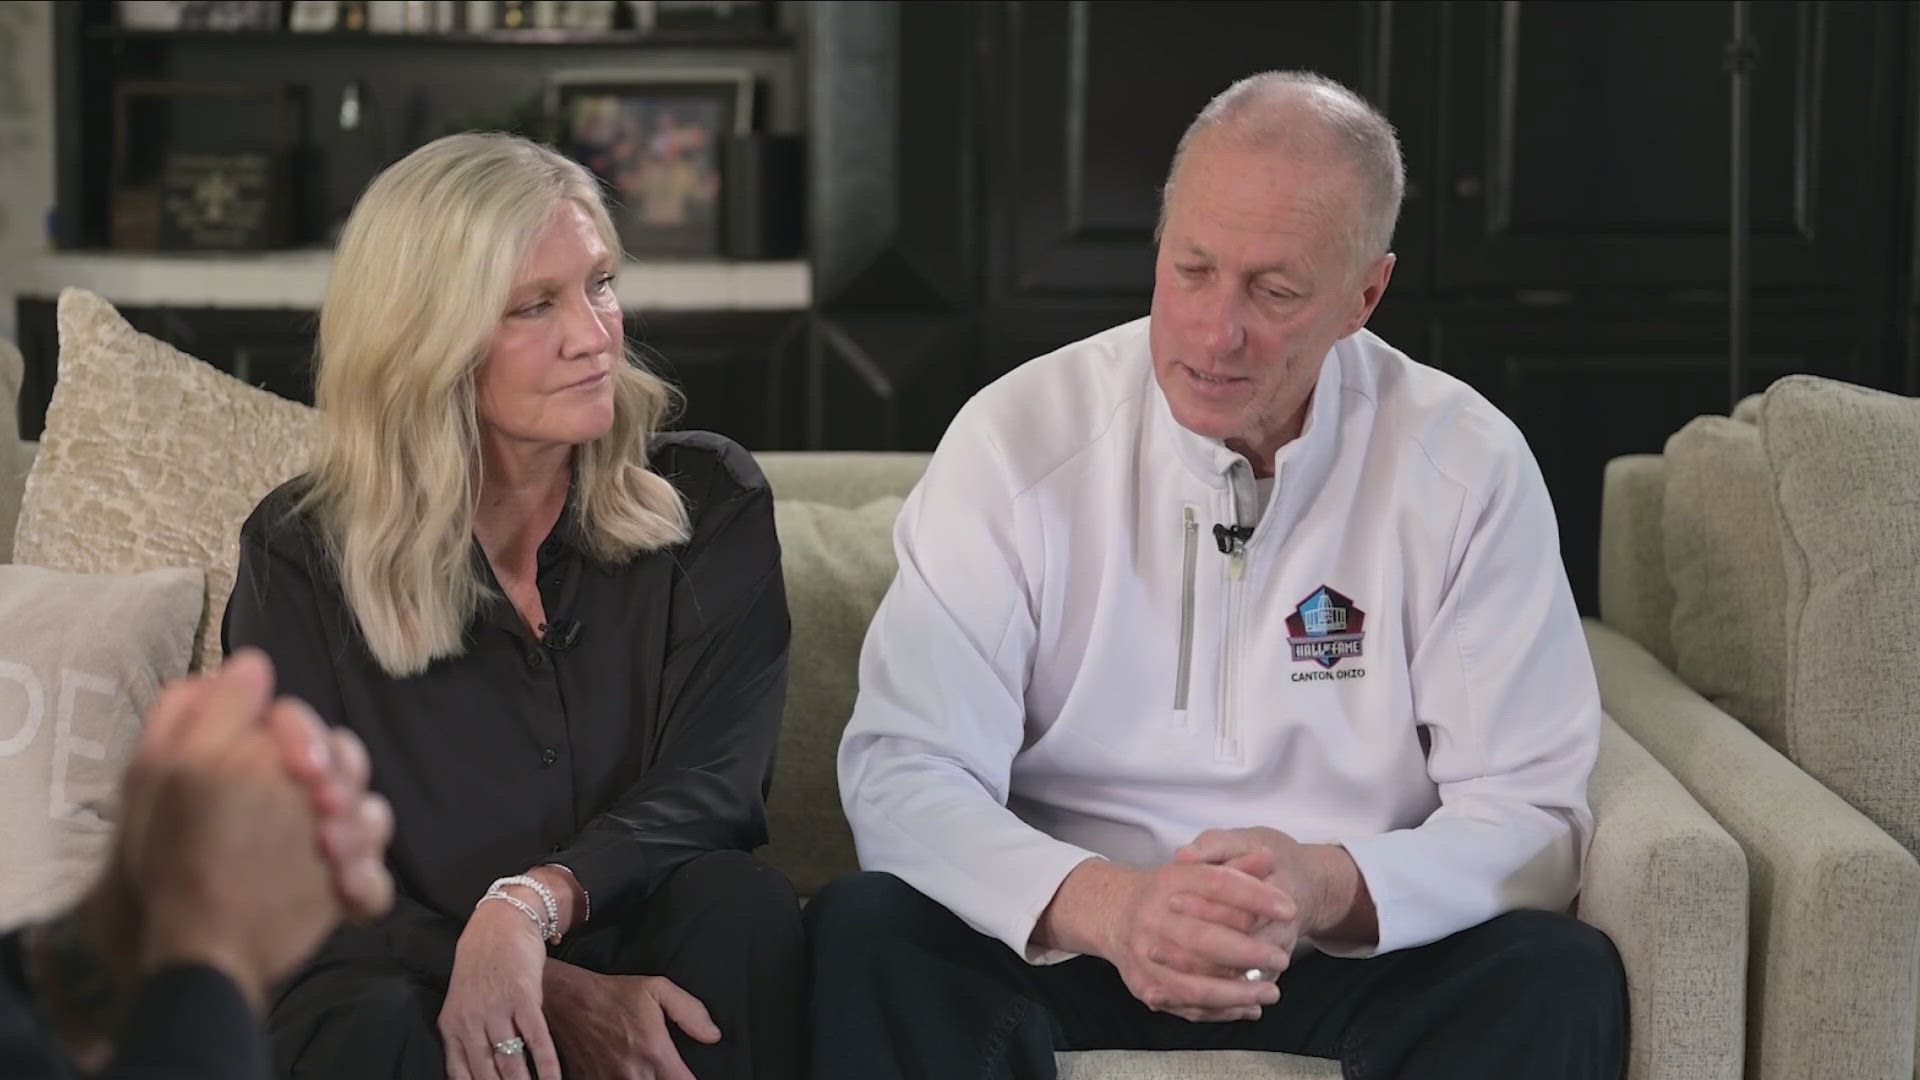 NFL Hall of Fame quarterback Jim Kelly celebrates 10 years since completing successful cancer radiation treatments for his oral cancer. Experts say it's a miracle.